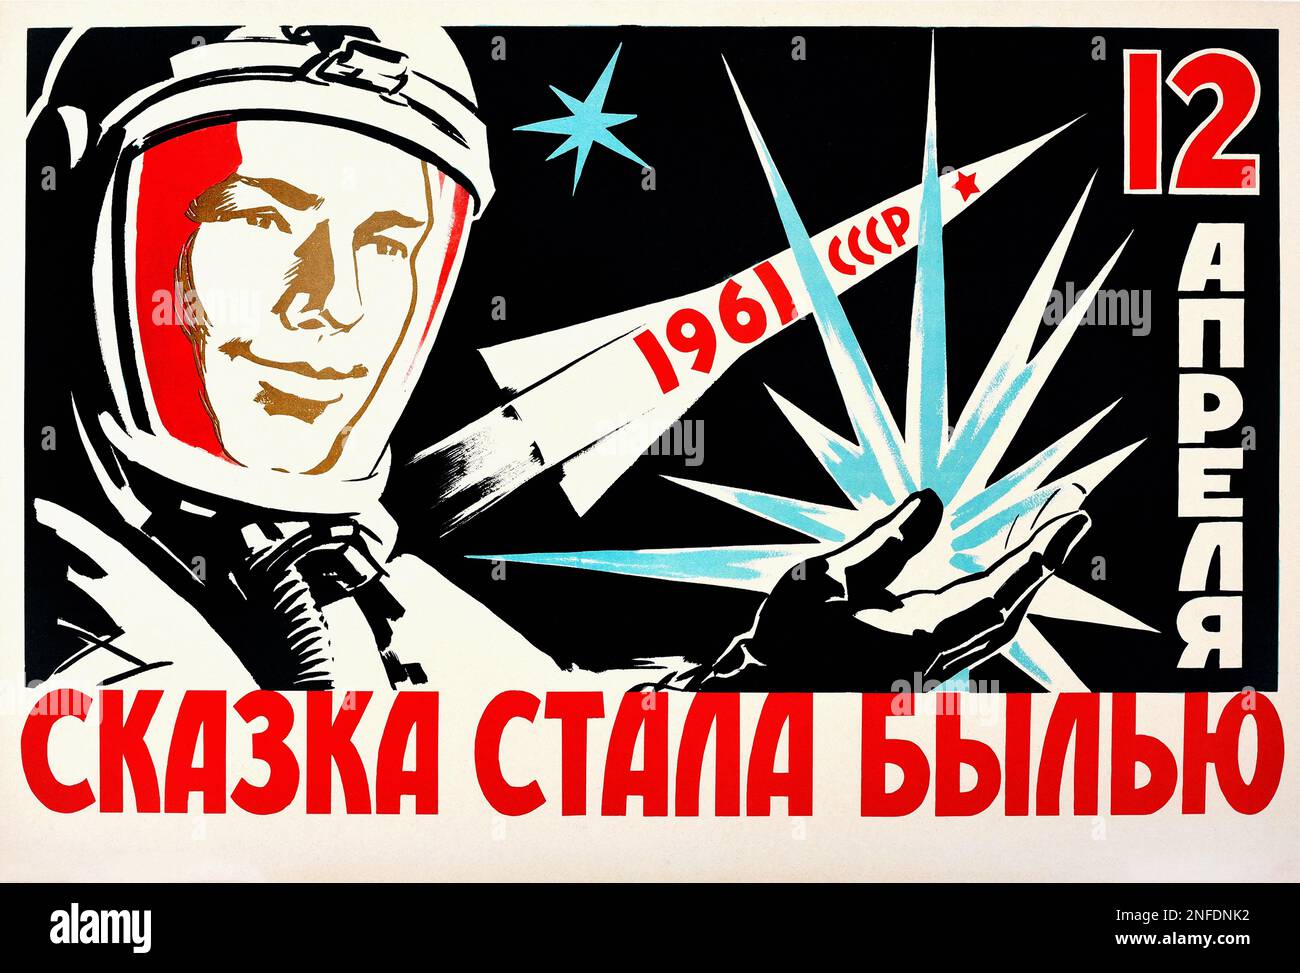 Soviet Space Poster - 'The Dreams Came True of 12 April - 1st Manned Space Flight. Yuri Gagarin cosmonaut the first human to journey in to space 1961 Stock Photo